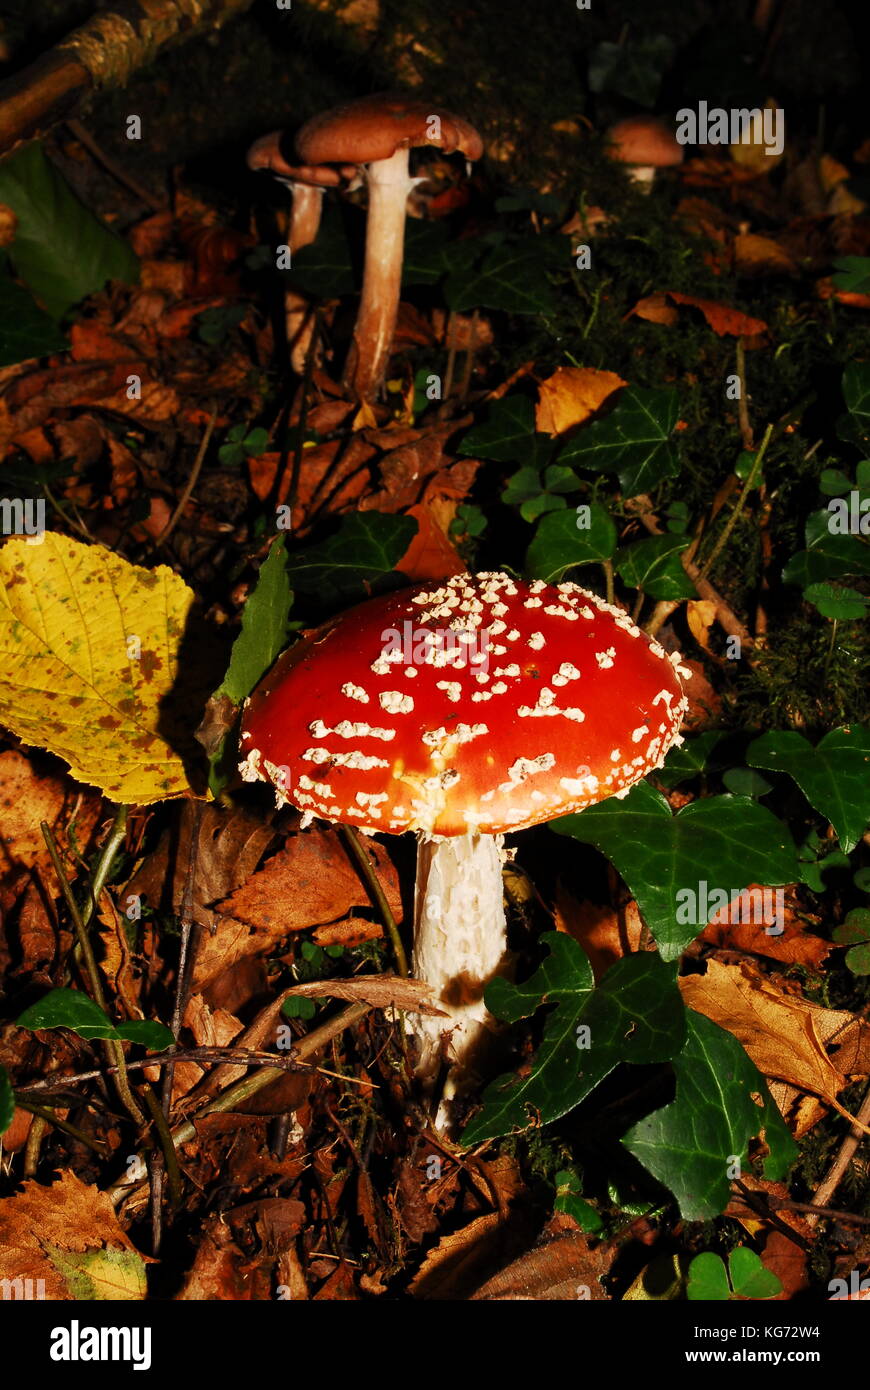 Woodland fungus growing in the autumn in the UK Stock Photo